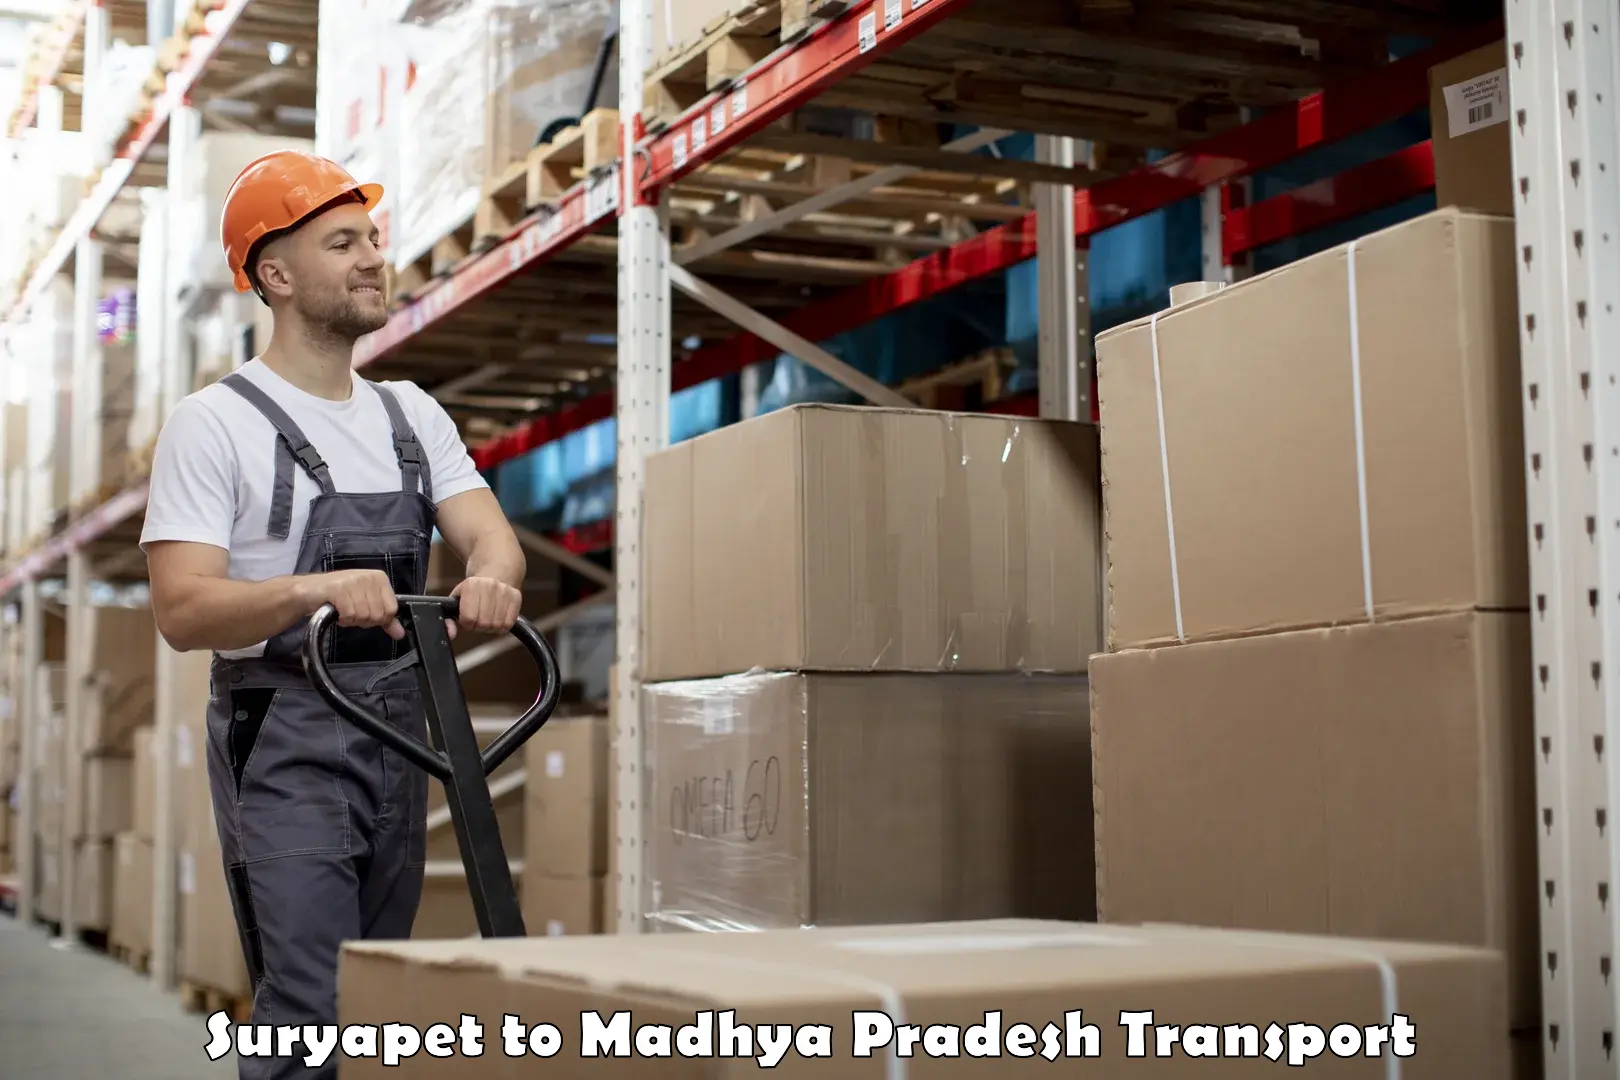 Road transport online services Suryapet to Sheopur